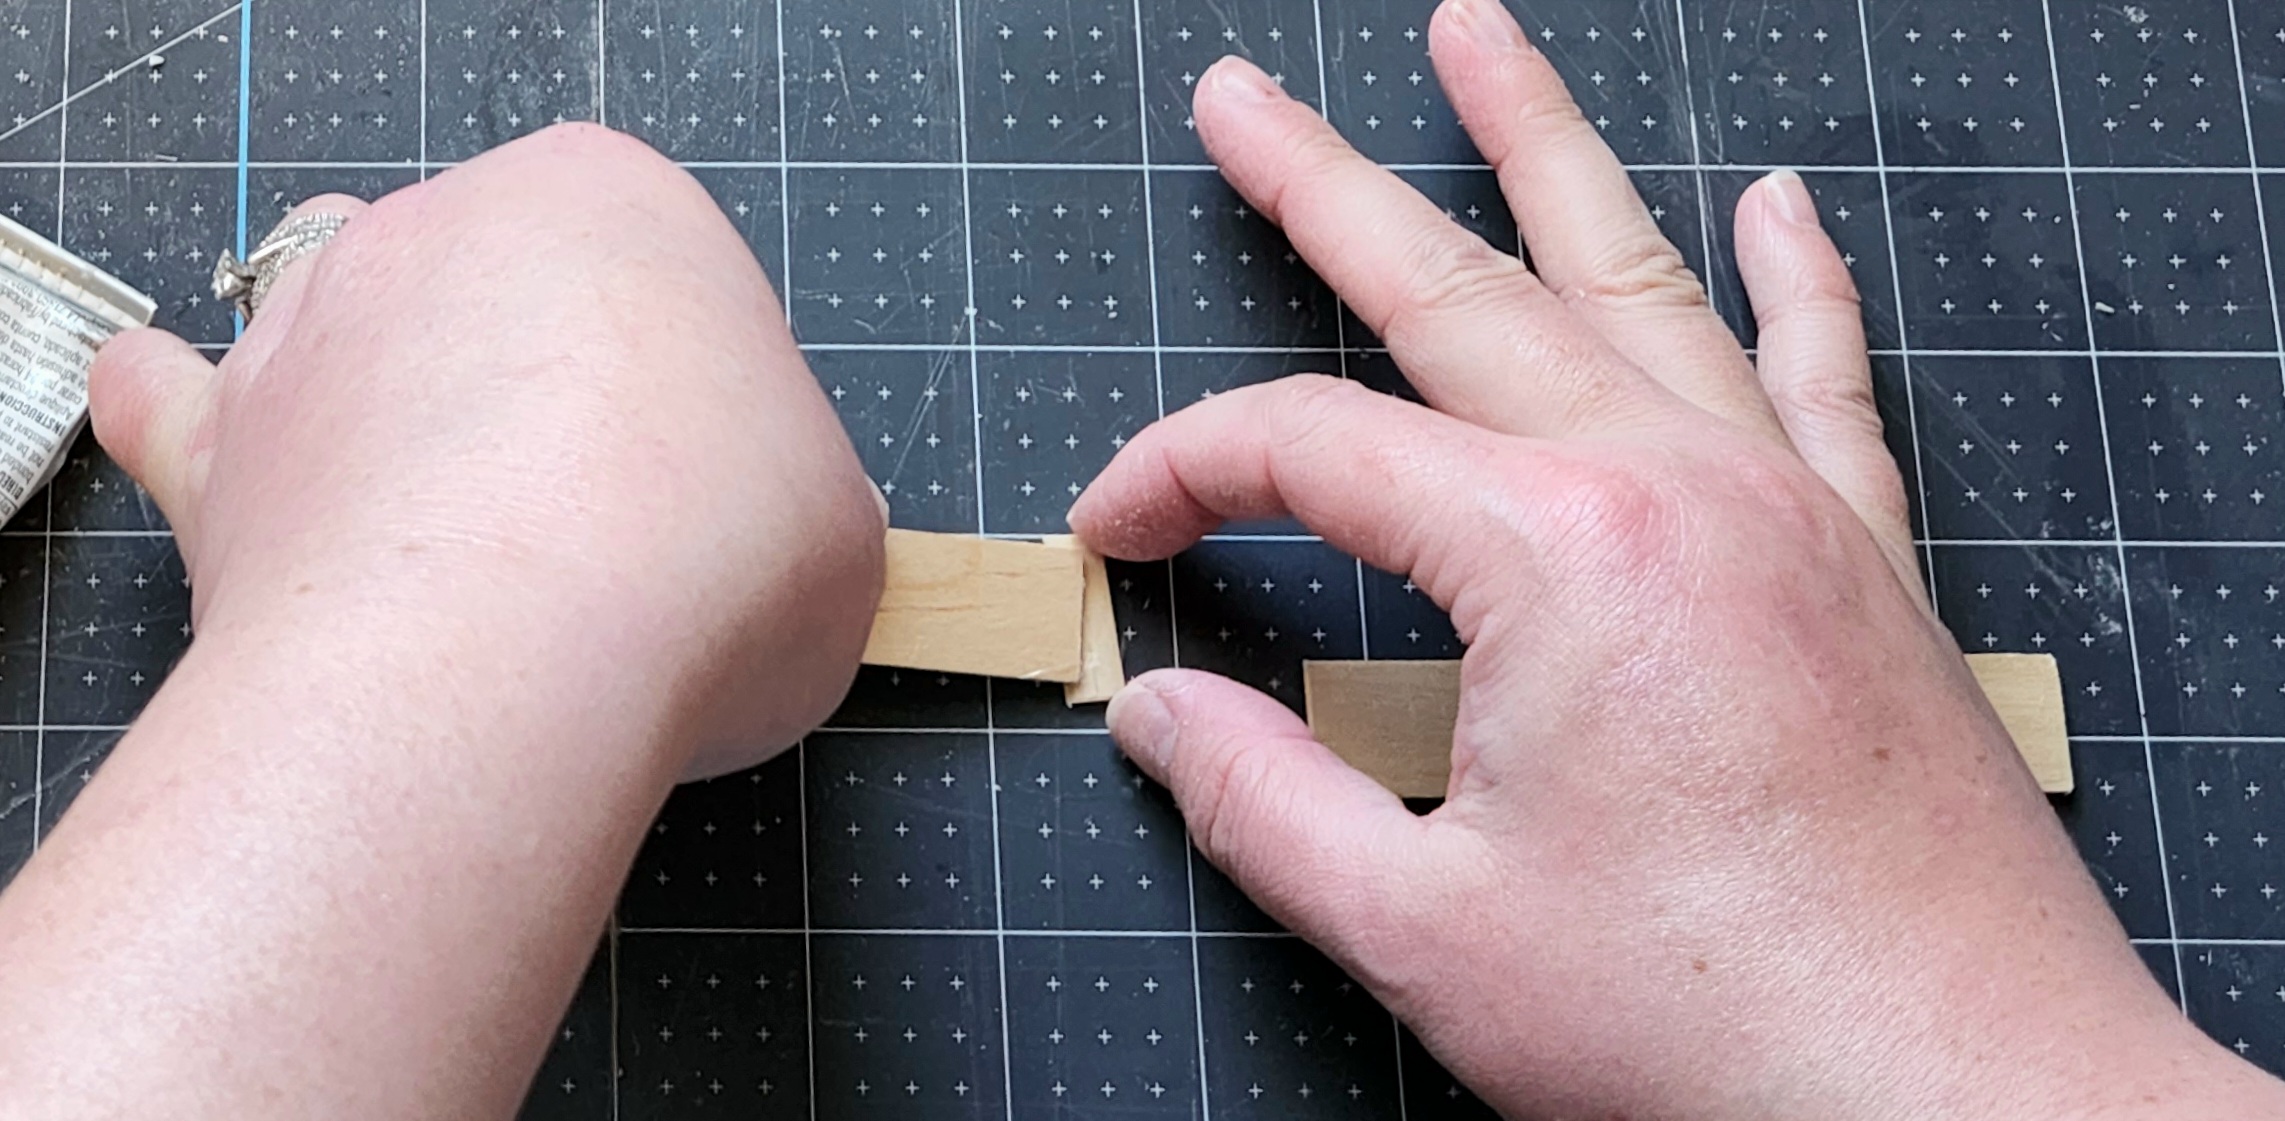 Placing a 4" craft stick onto the middle of a 1" stick.